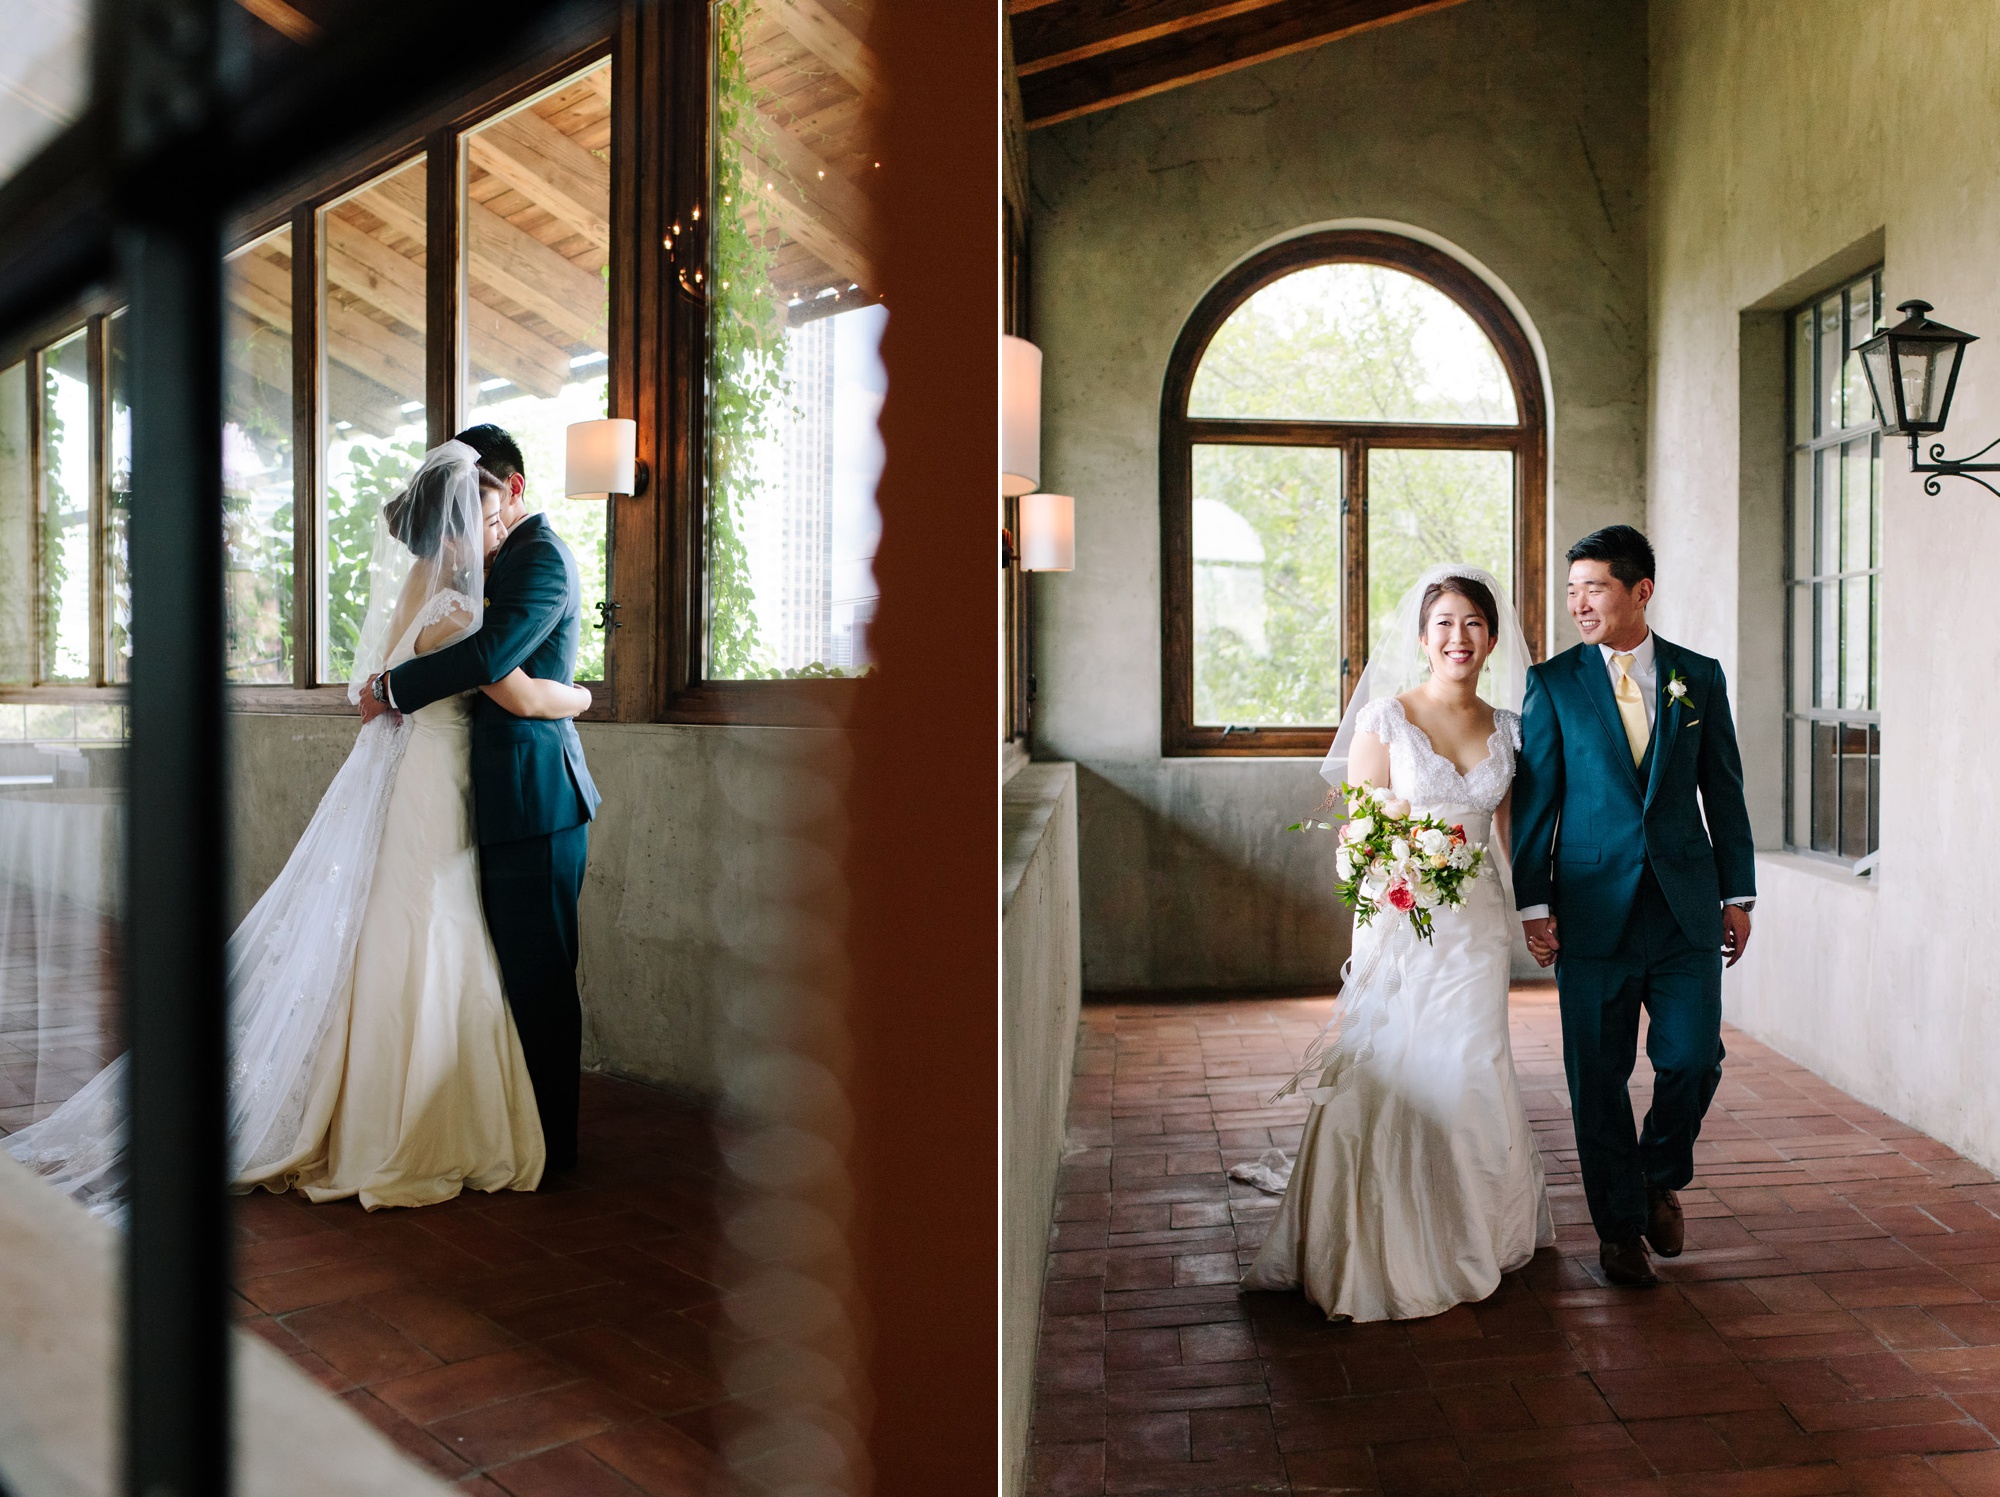 This first look at Summerour was so intimate and special. Captured by Summerour wedding photographer Rebecca Cerasani